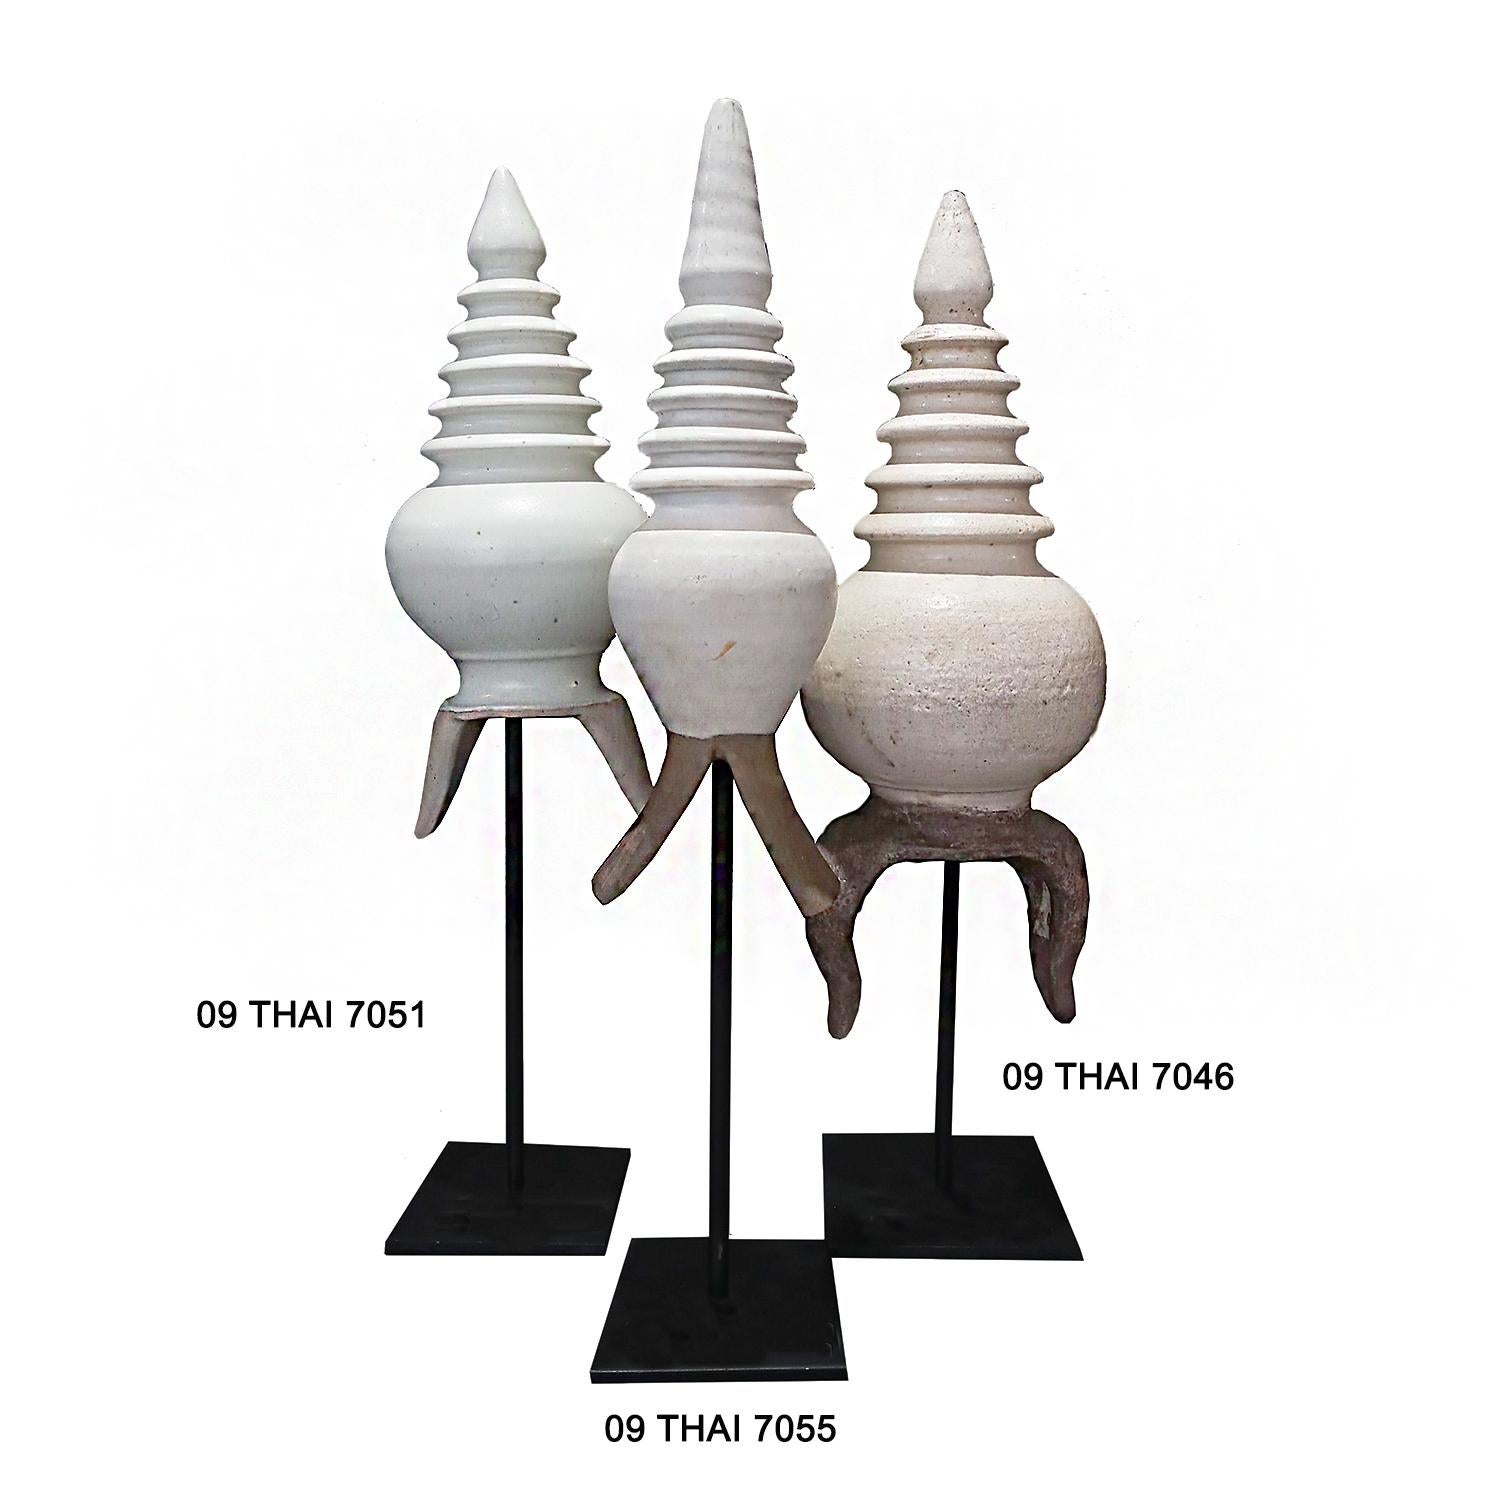 Thai Ceramic Stupa Architectural Details, on Stand For Sale 6